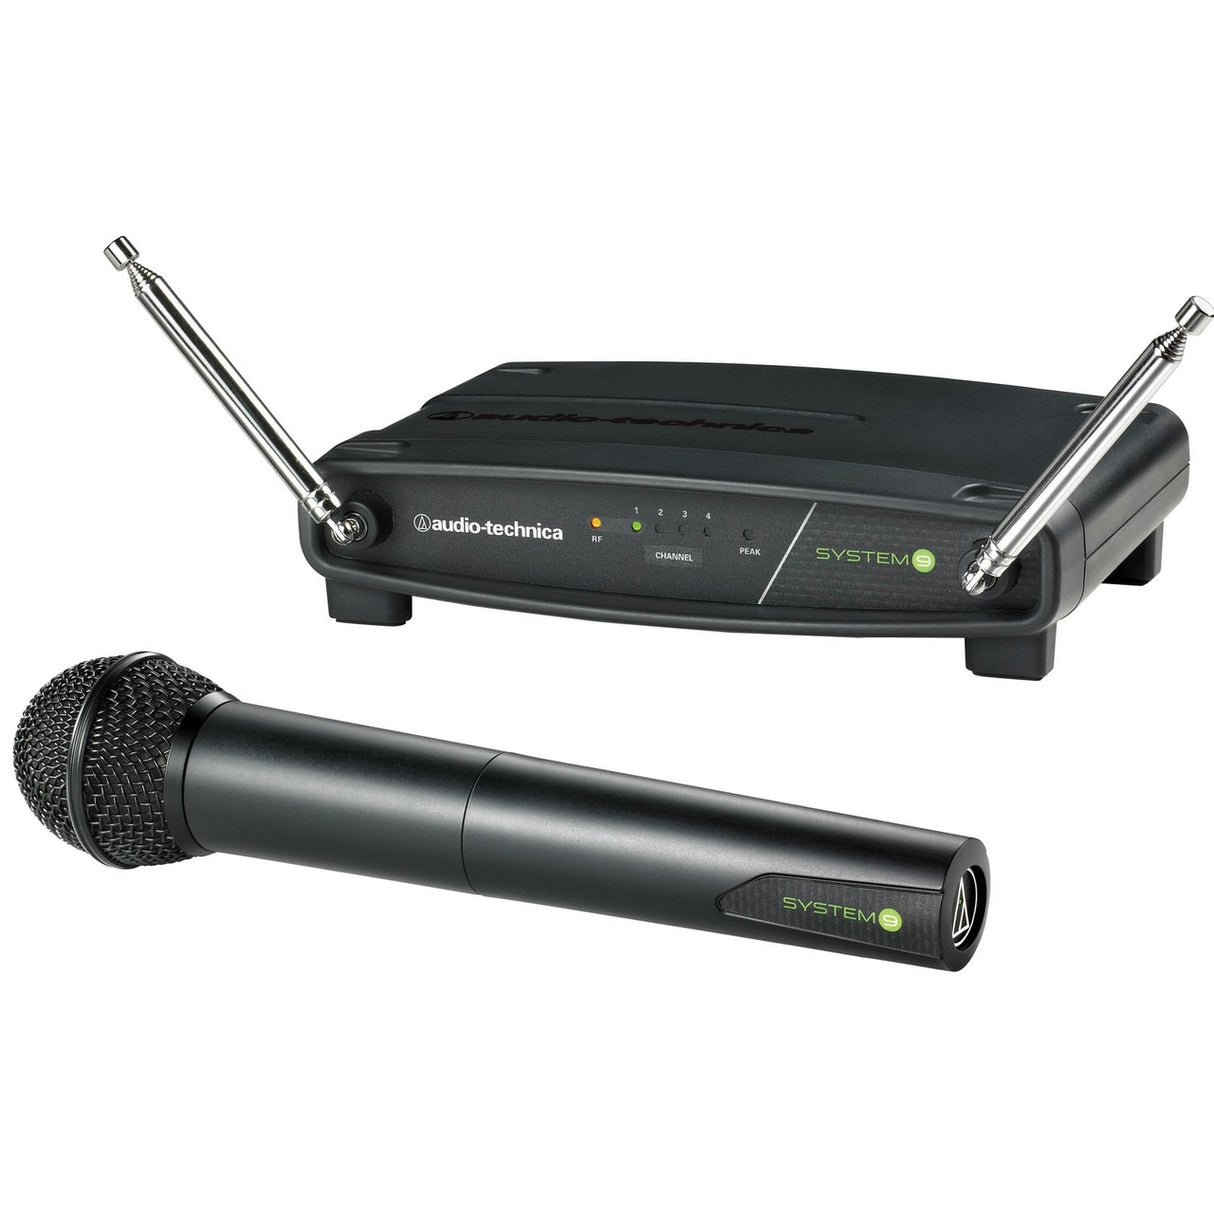 Audio Technica ATW-902a | System 9 VHF Wireless System with Handheld Unidirectional Microphone